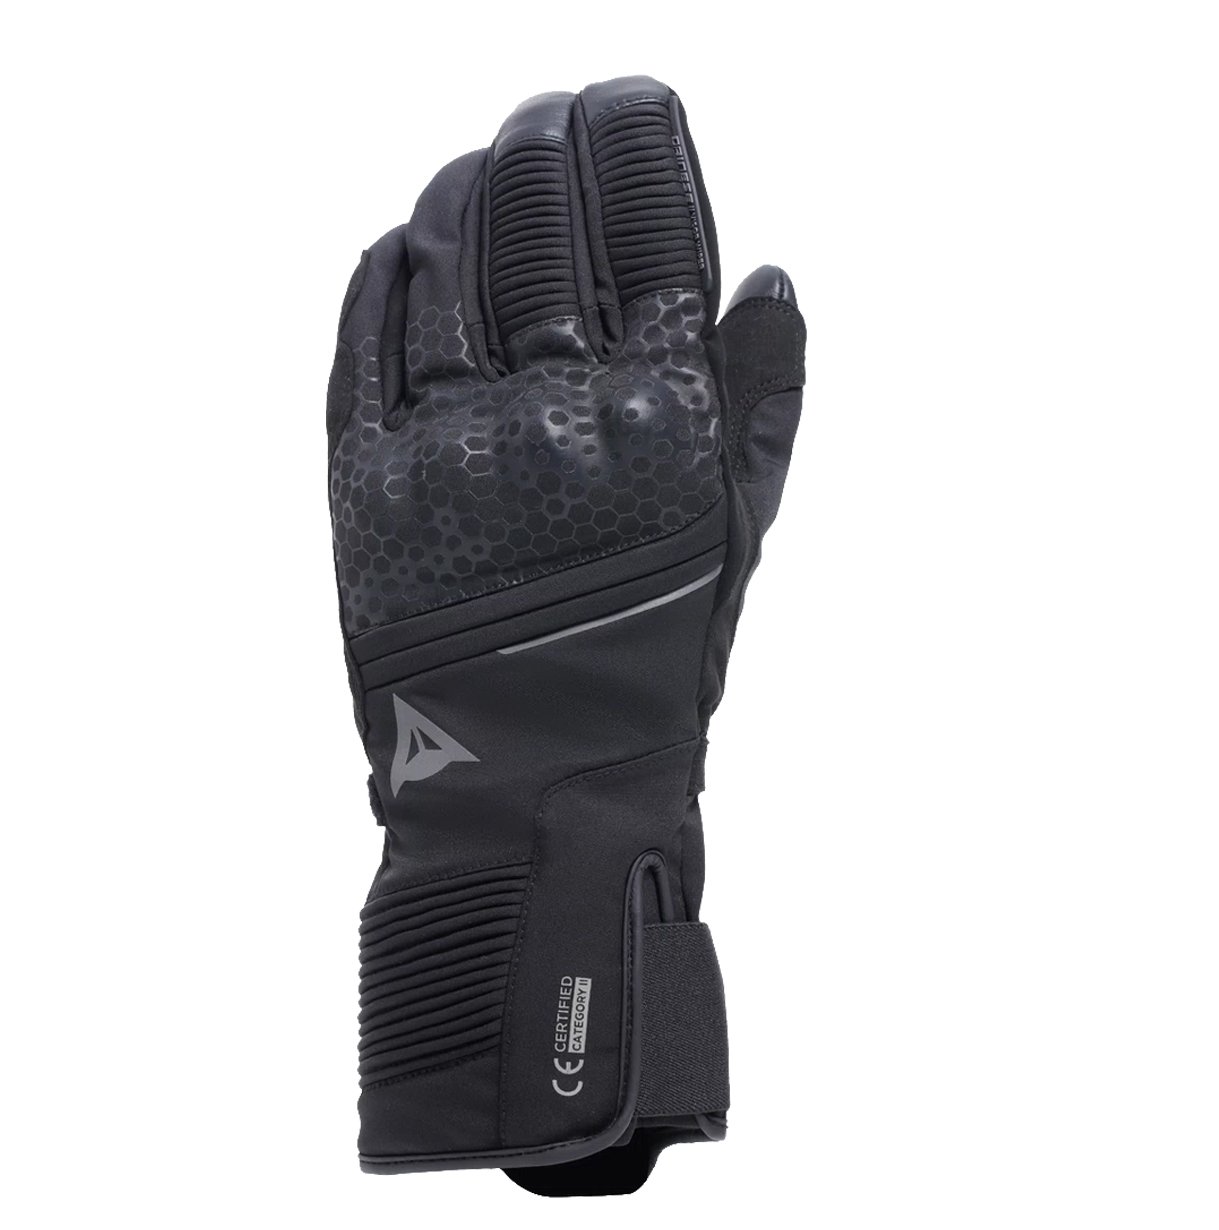 Image of Dainese Tempest 2 D-Dry Long Thermal Gloves Black Size XL ID 8051019679642